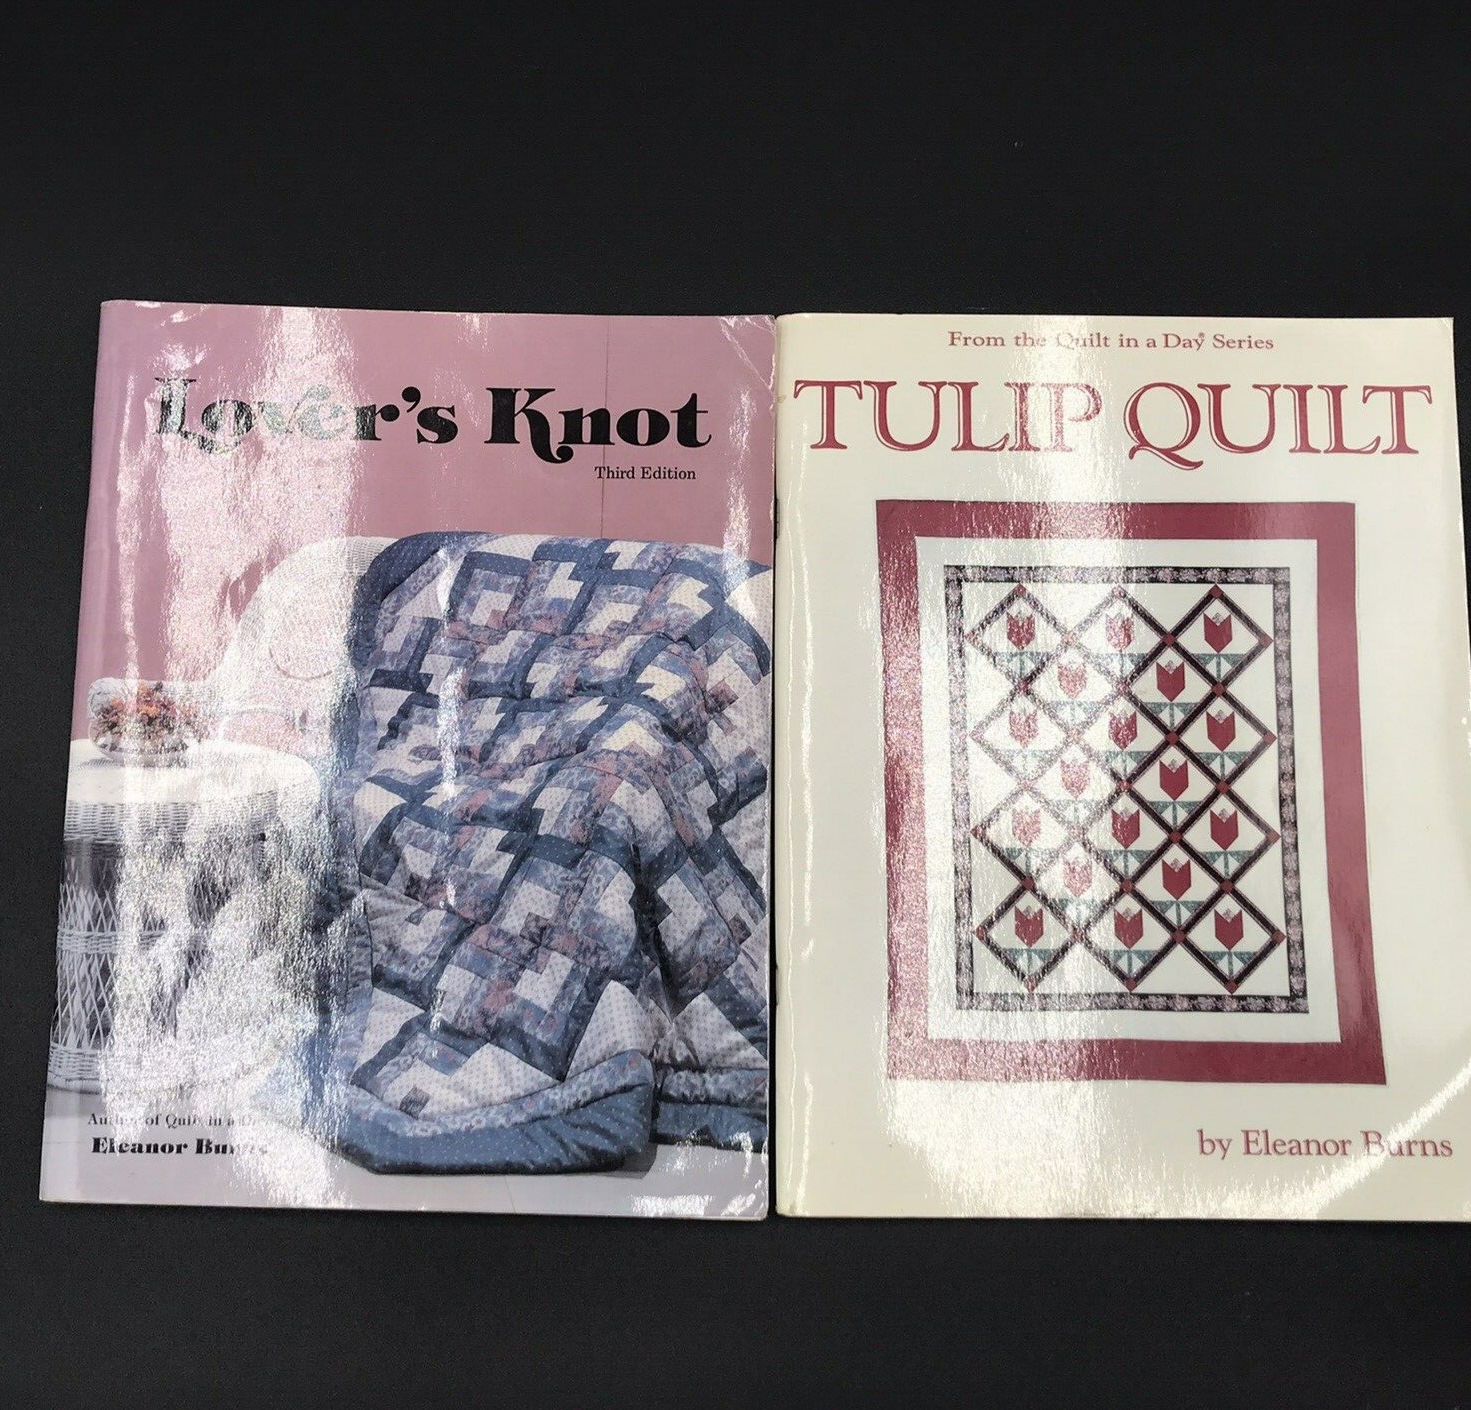 Primary image for Quilt in a Day Eleanor Burns Quilting Books Lover's Knot Tulip Quilt Lot of 2